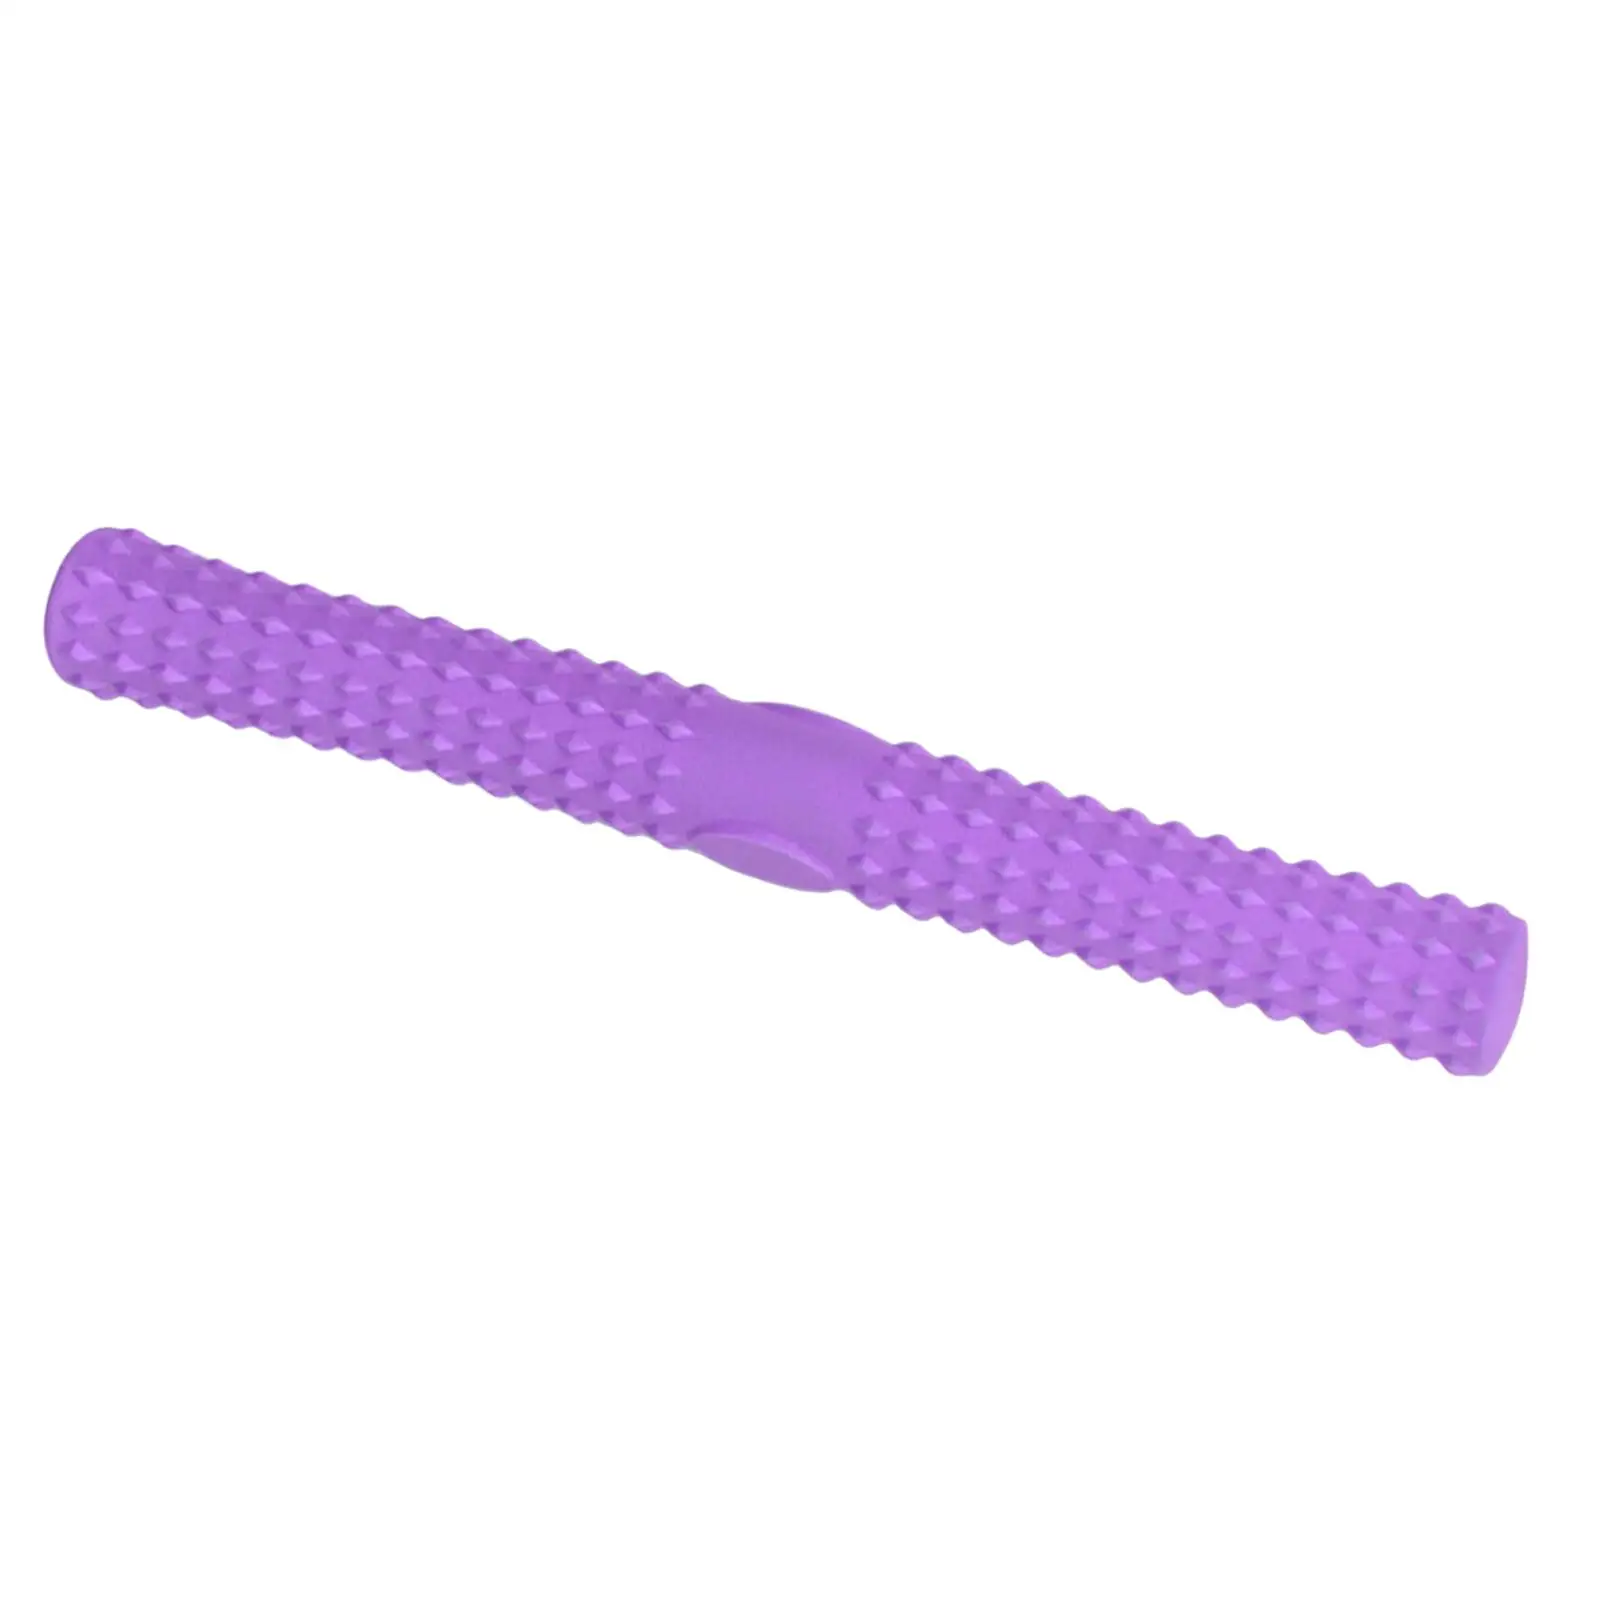 Twist Exerciser Bars Home Gym Silicone Wrist Strength Resistance Training Bar for Legs Full Body Relaxing Meridian Clap Shoulder